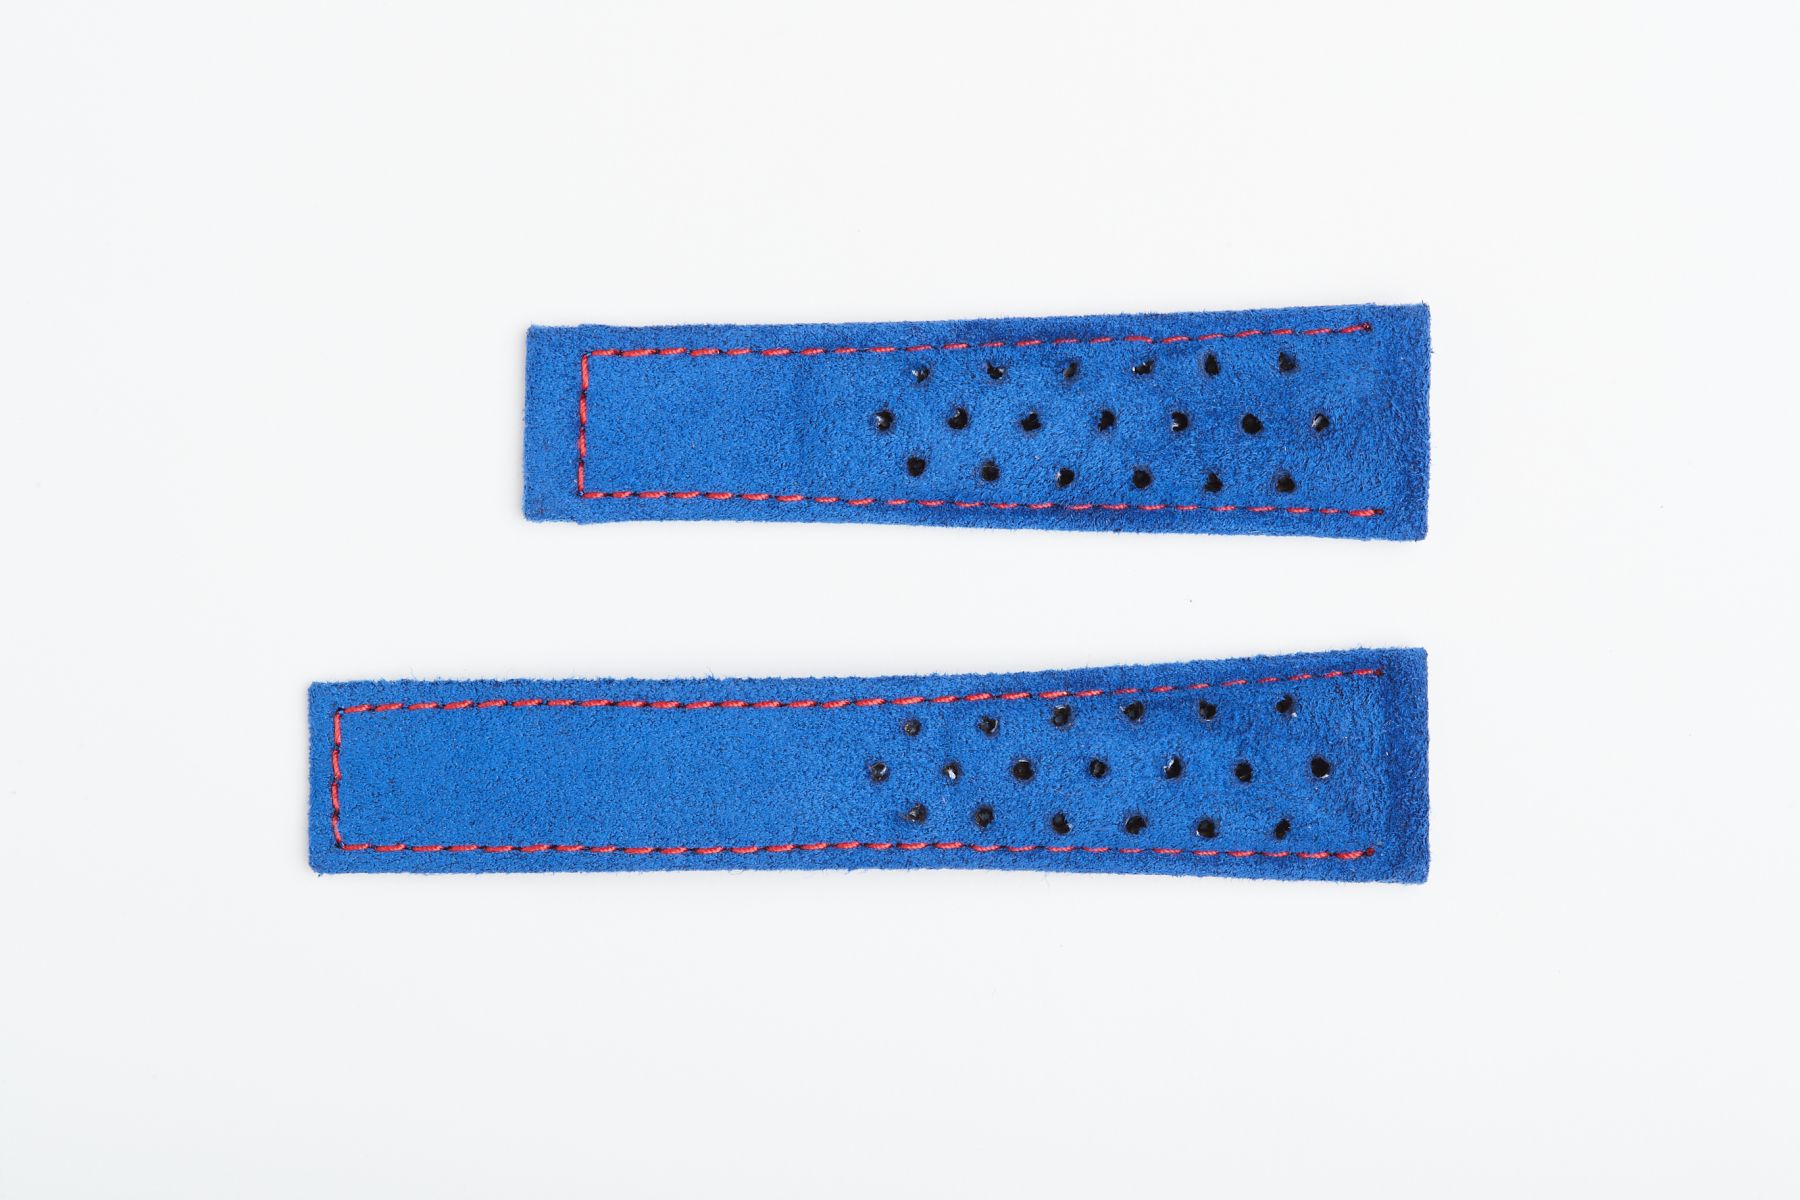 Baltic Blue Italian Alcantara Speedy Watch Band 22mm Tag Heuer Monaco style. Red stitching. Perforated Profile